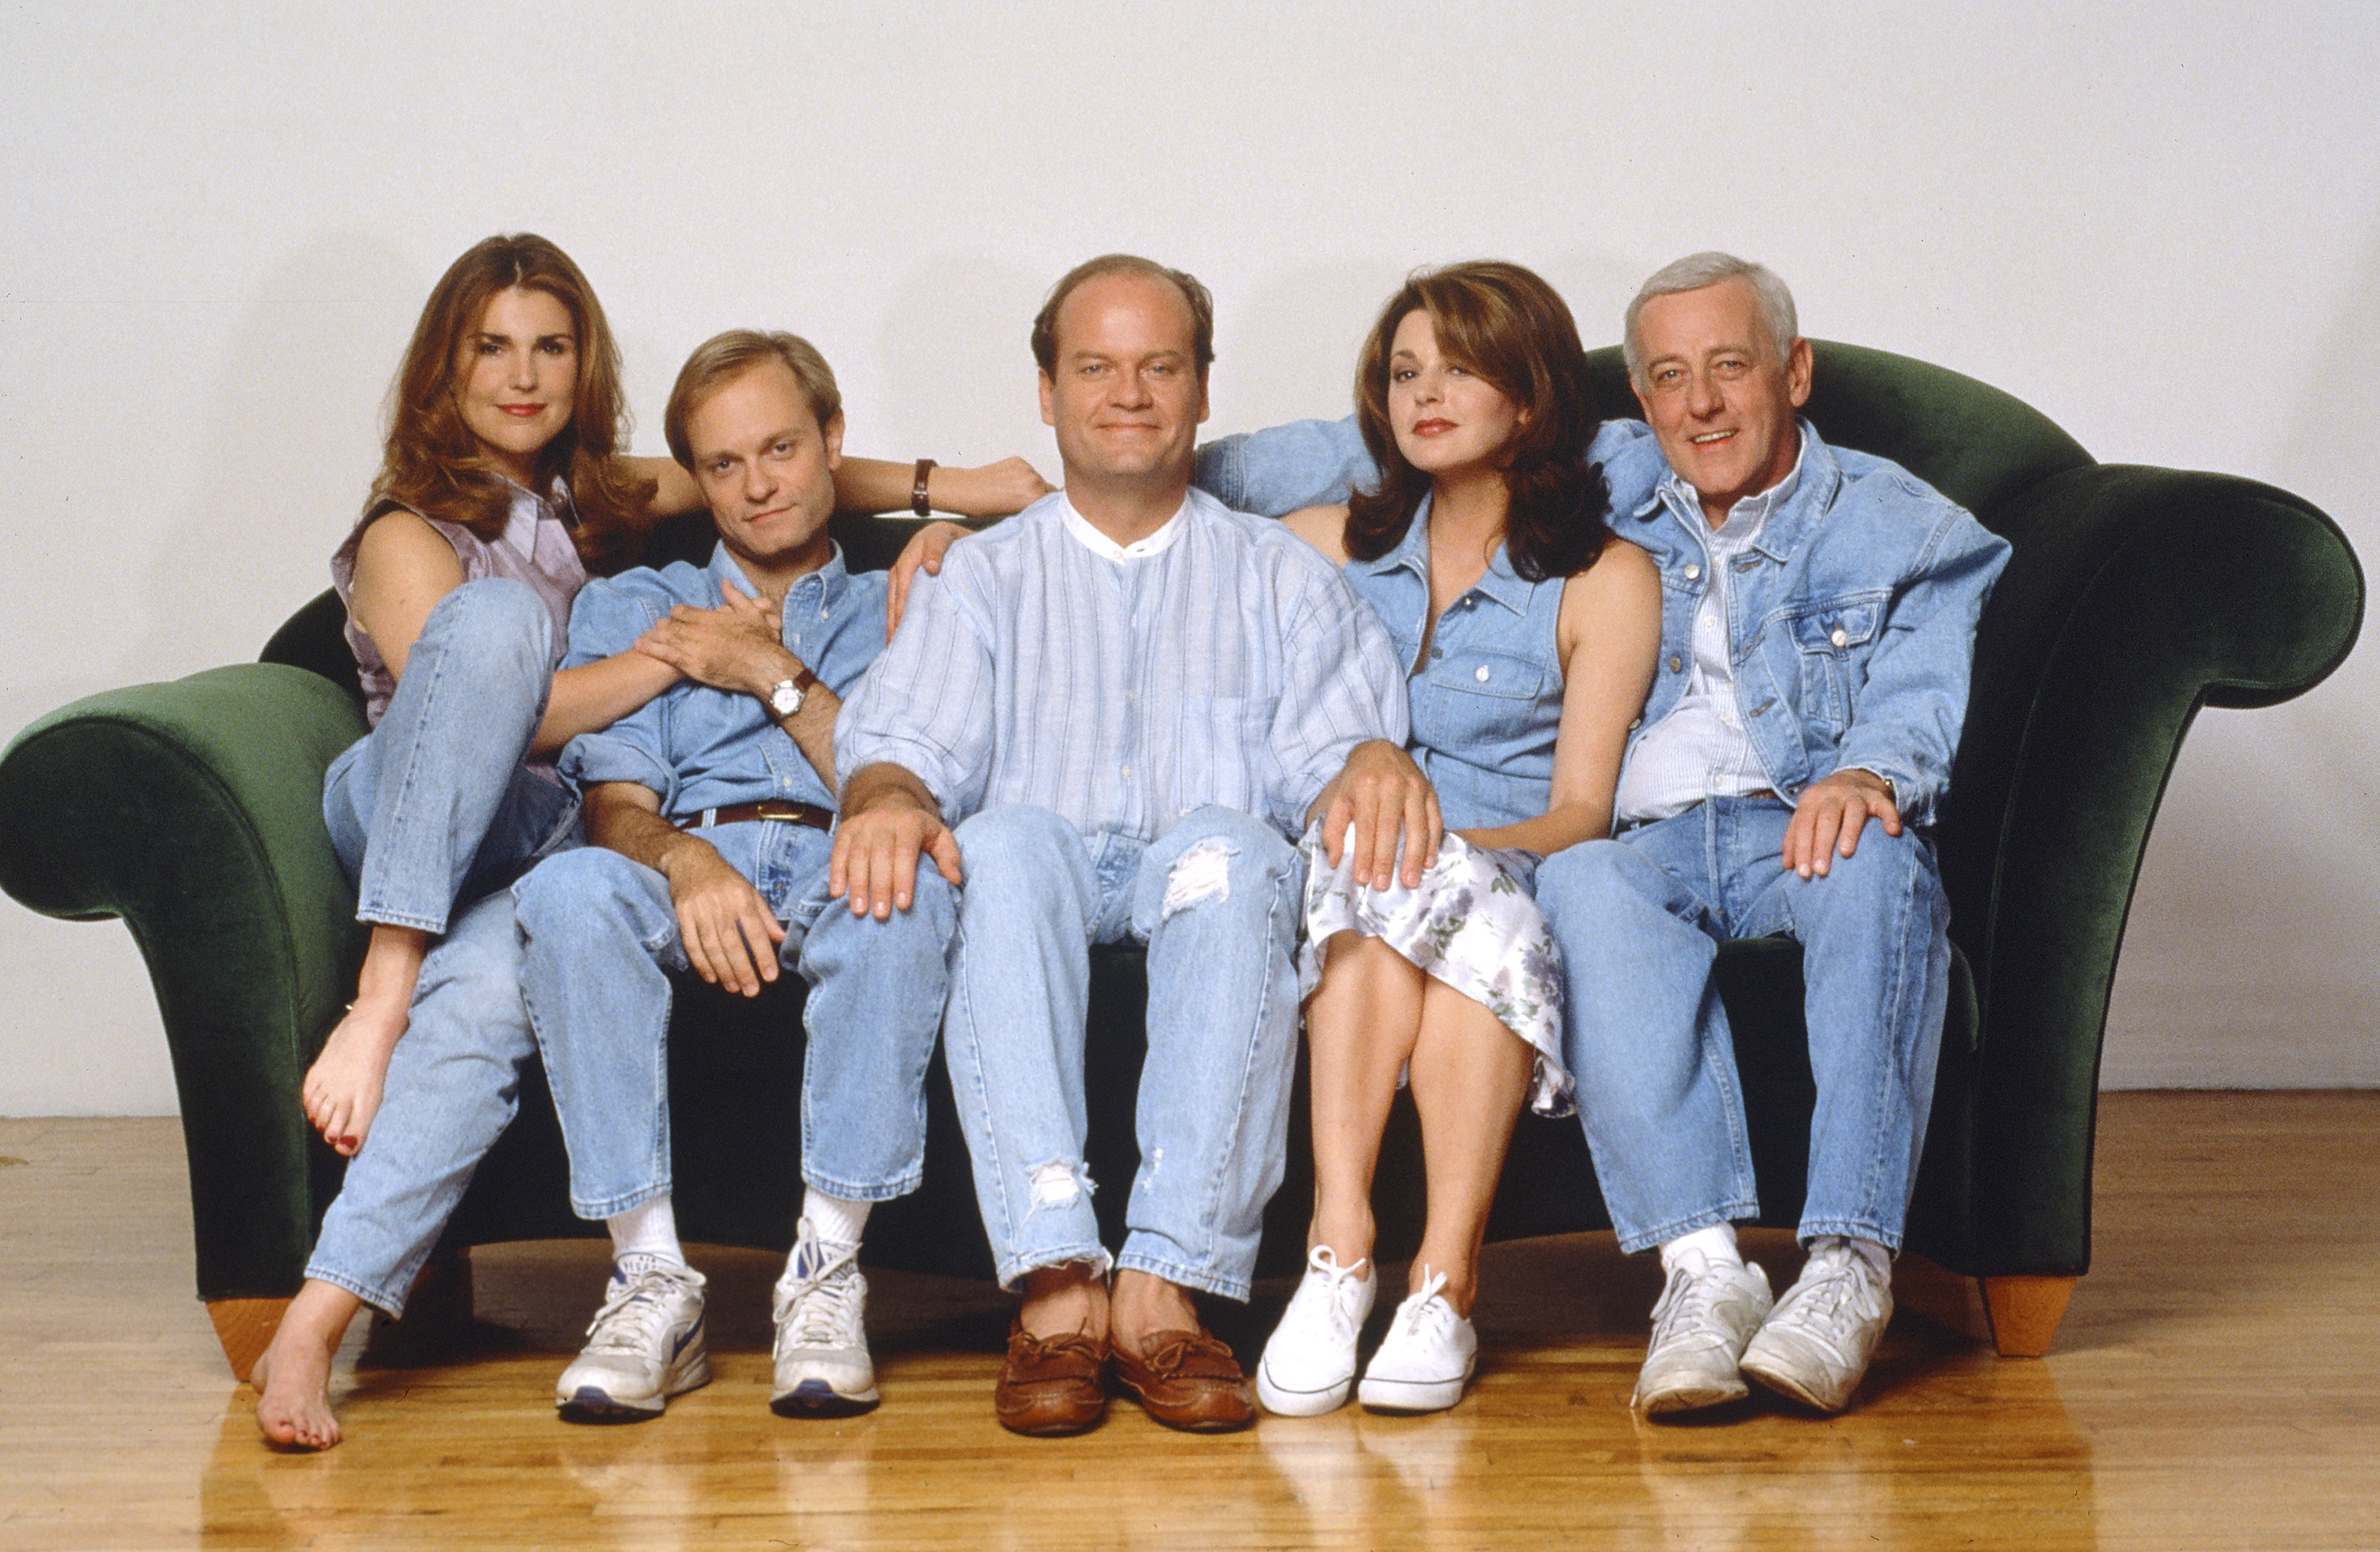 The cast of 'Frasier' sits on a couch together for a promotional photo